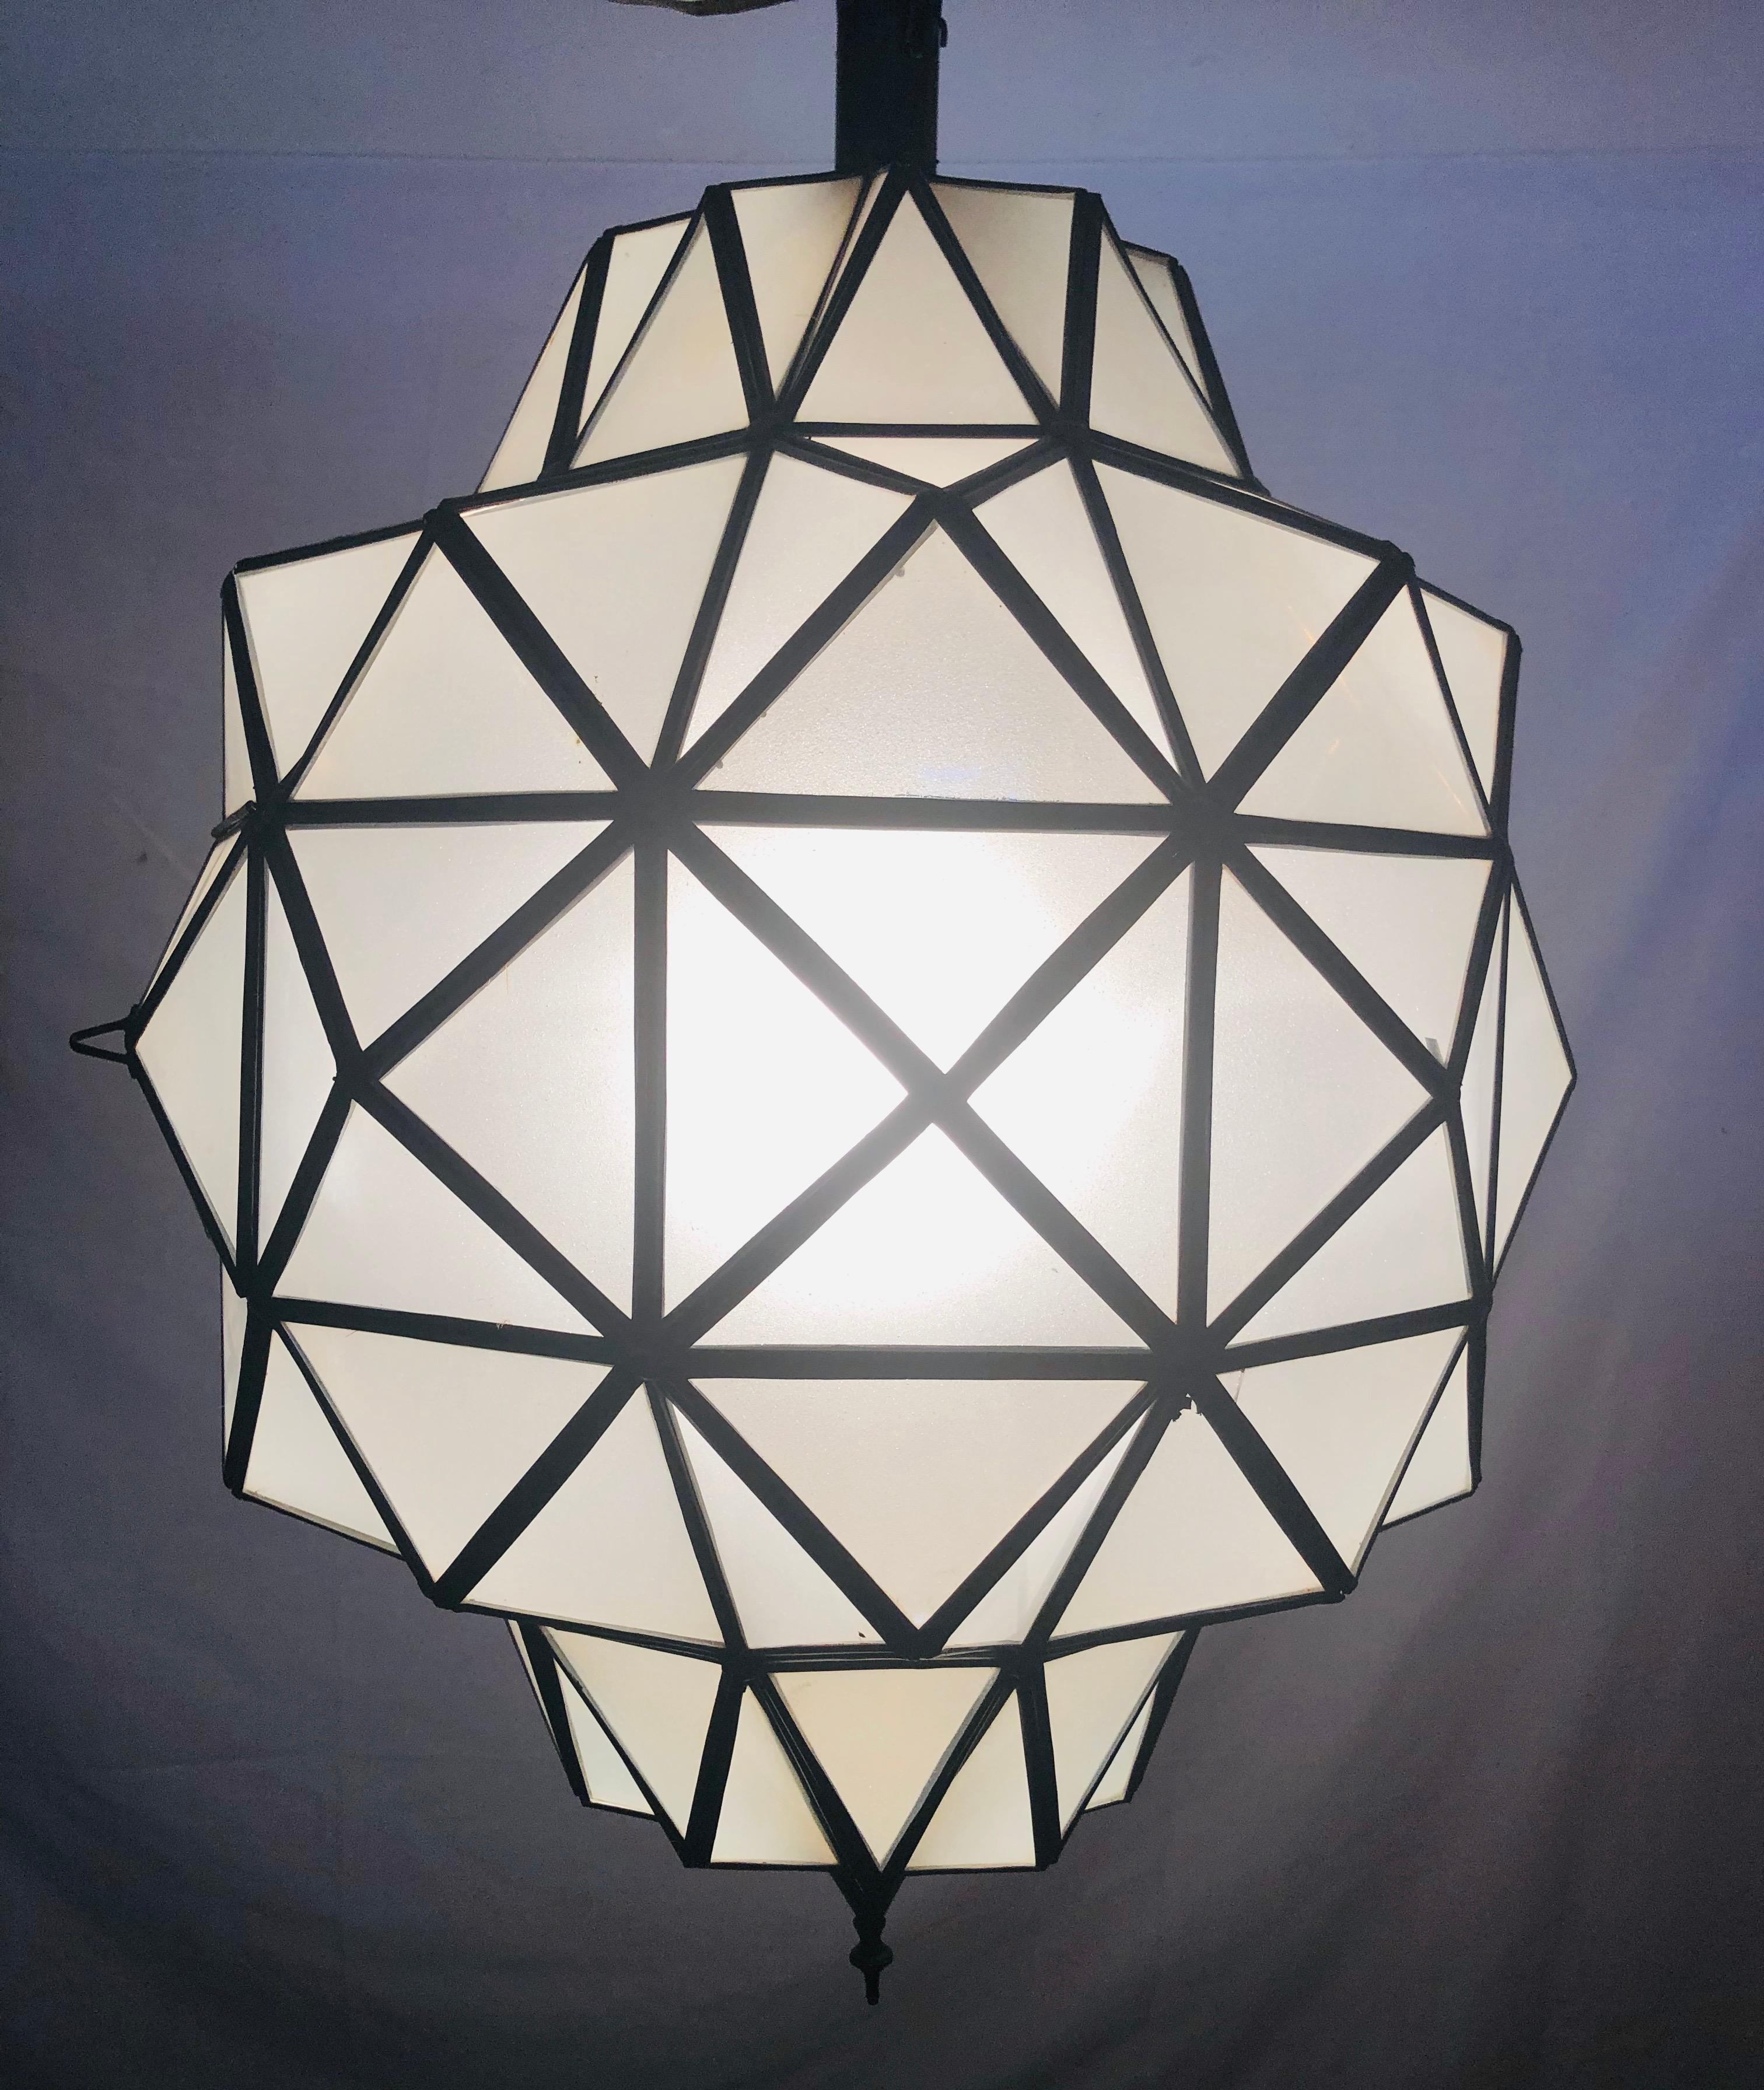 A stunning pair of Art Deco style dome form milk glass white chandeliers or lanterns. Each having individual panes, possessing an open door pane leading to a double recently wired setting housing 1 bulb. These fine custom lanterns are sure to light